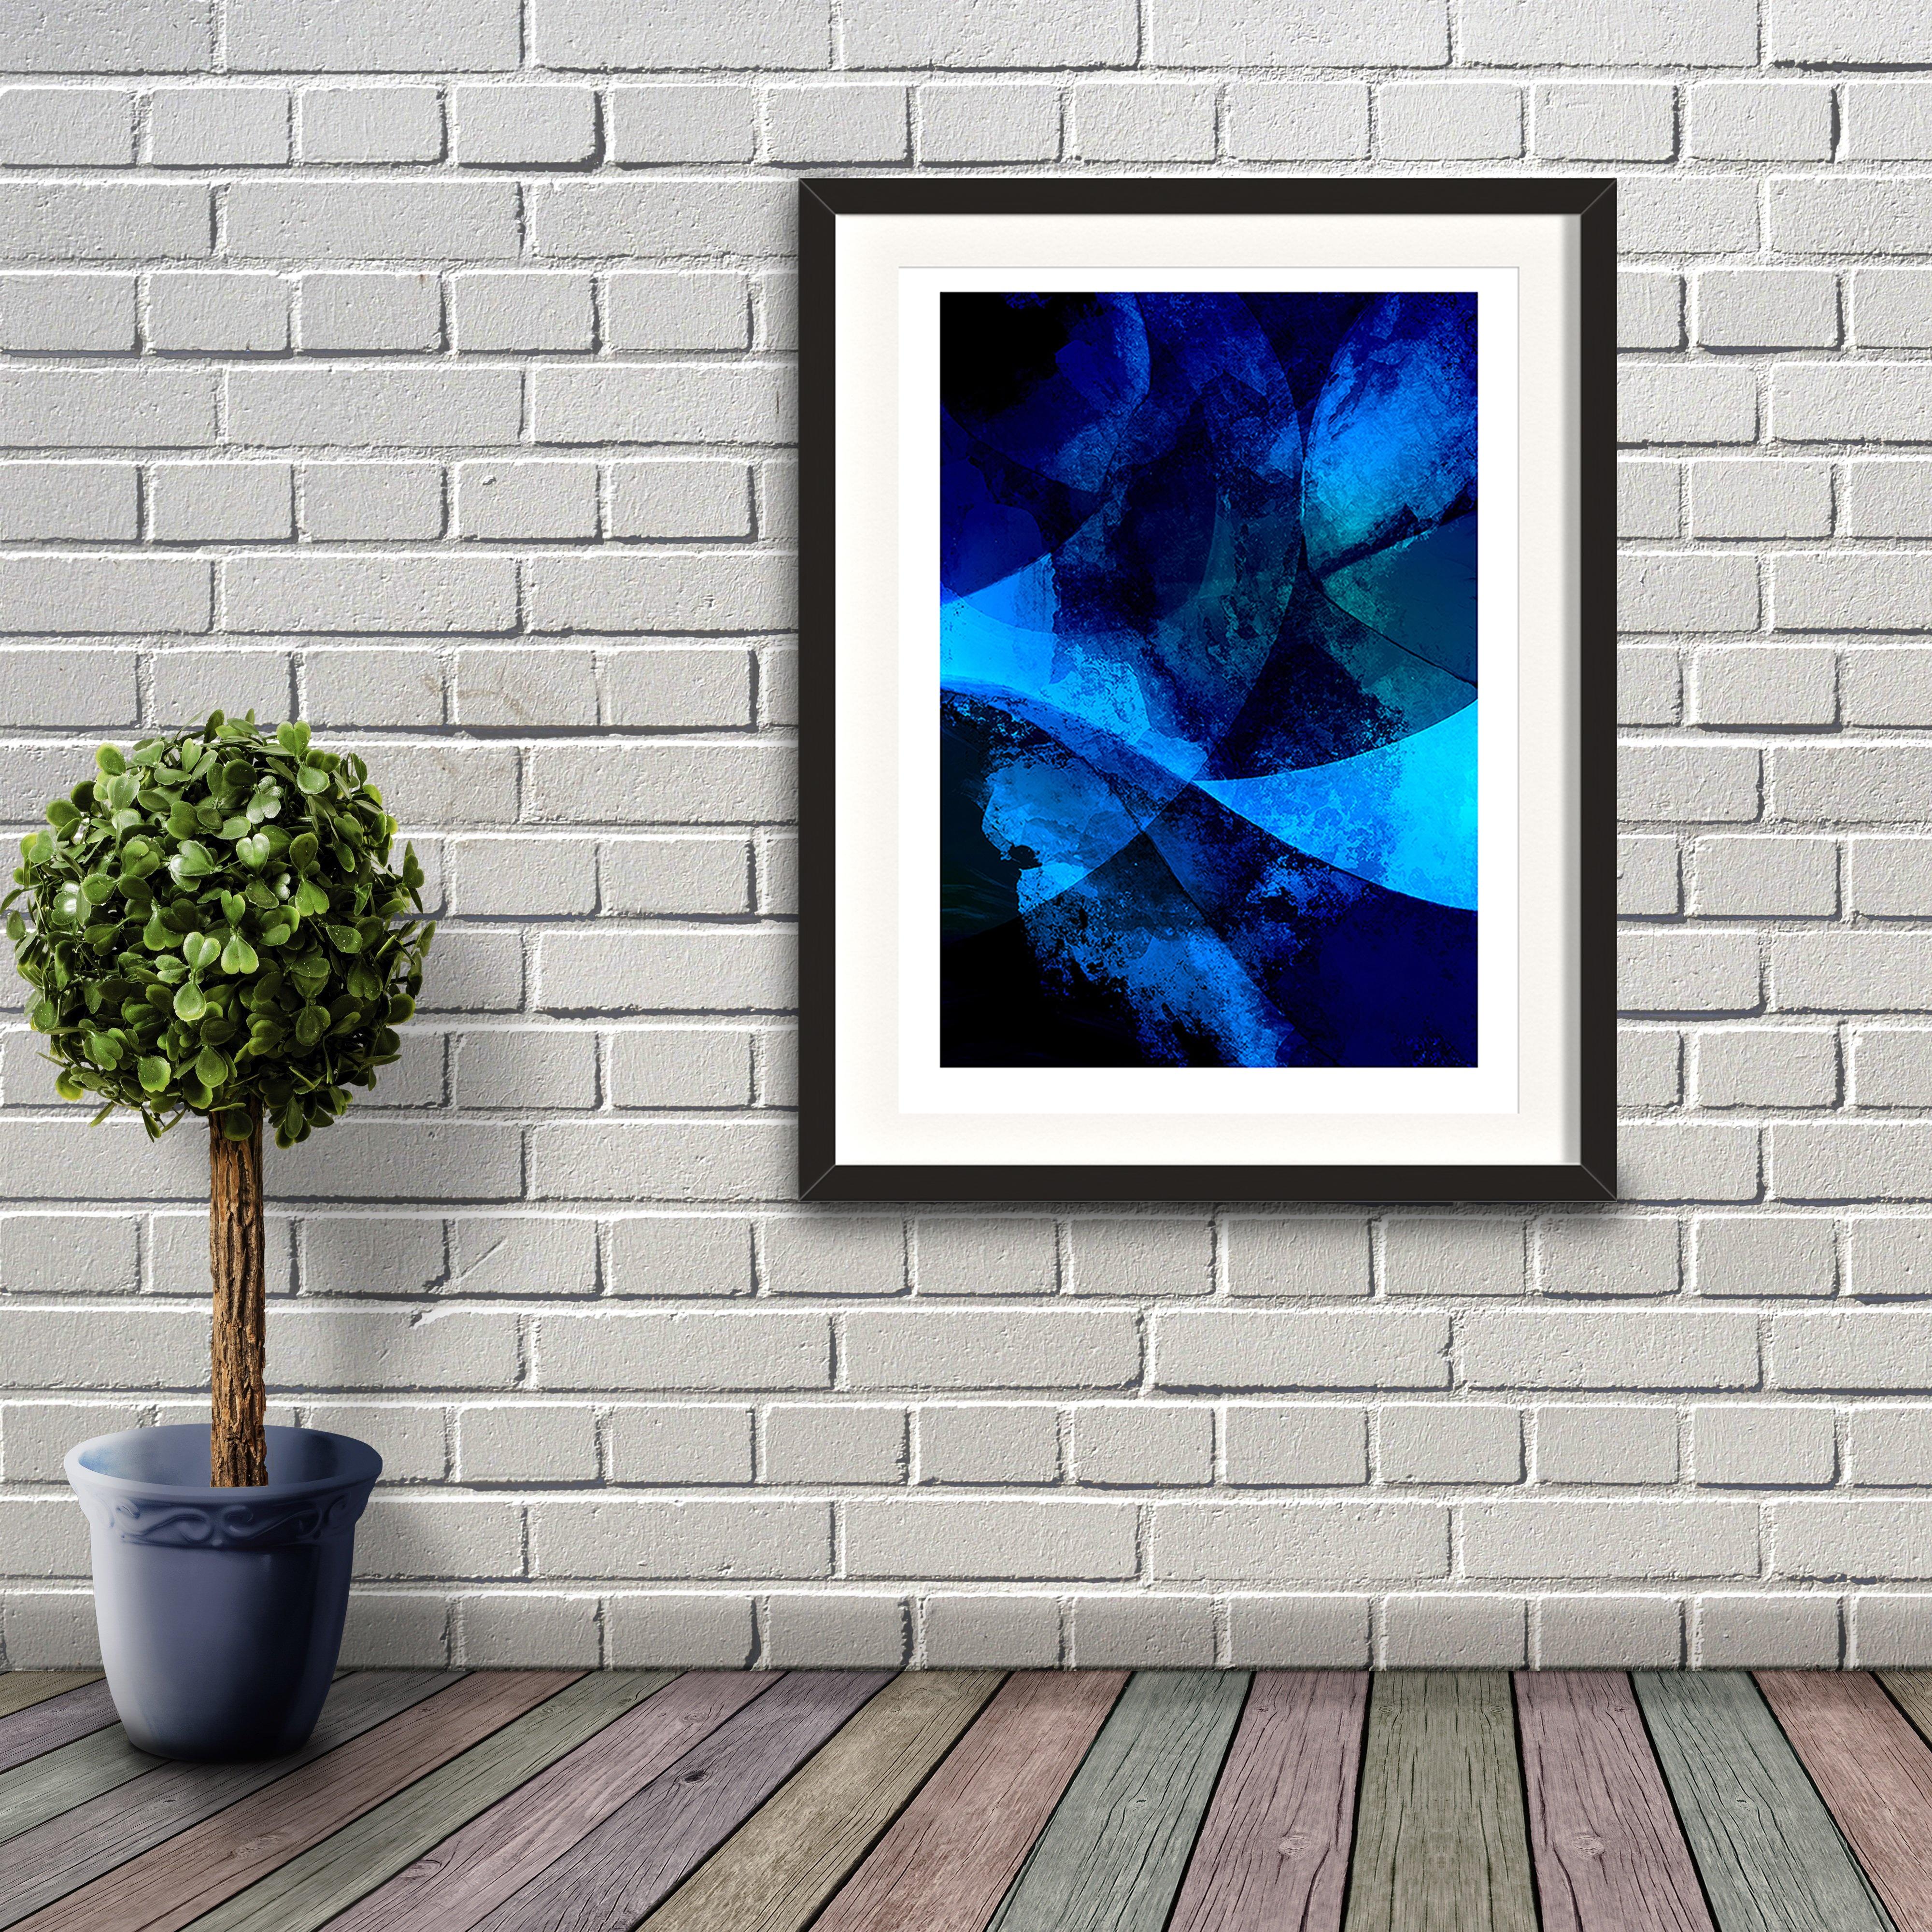 A digital painting by Lily Bourne printed on eco fine art paper titled Blue Passion From Within showing a series of curved lines and textures coloured shade of blue and black. Artwork is shown shown framed on a brick wall.